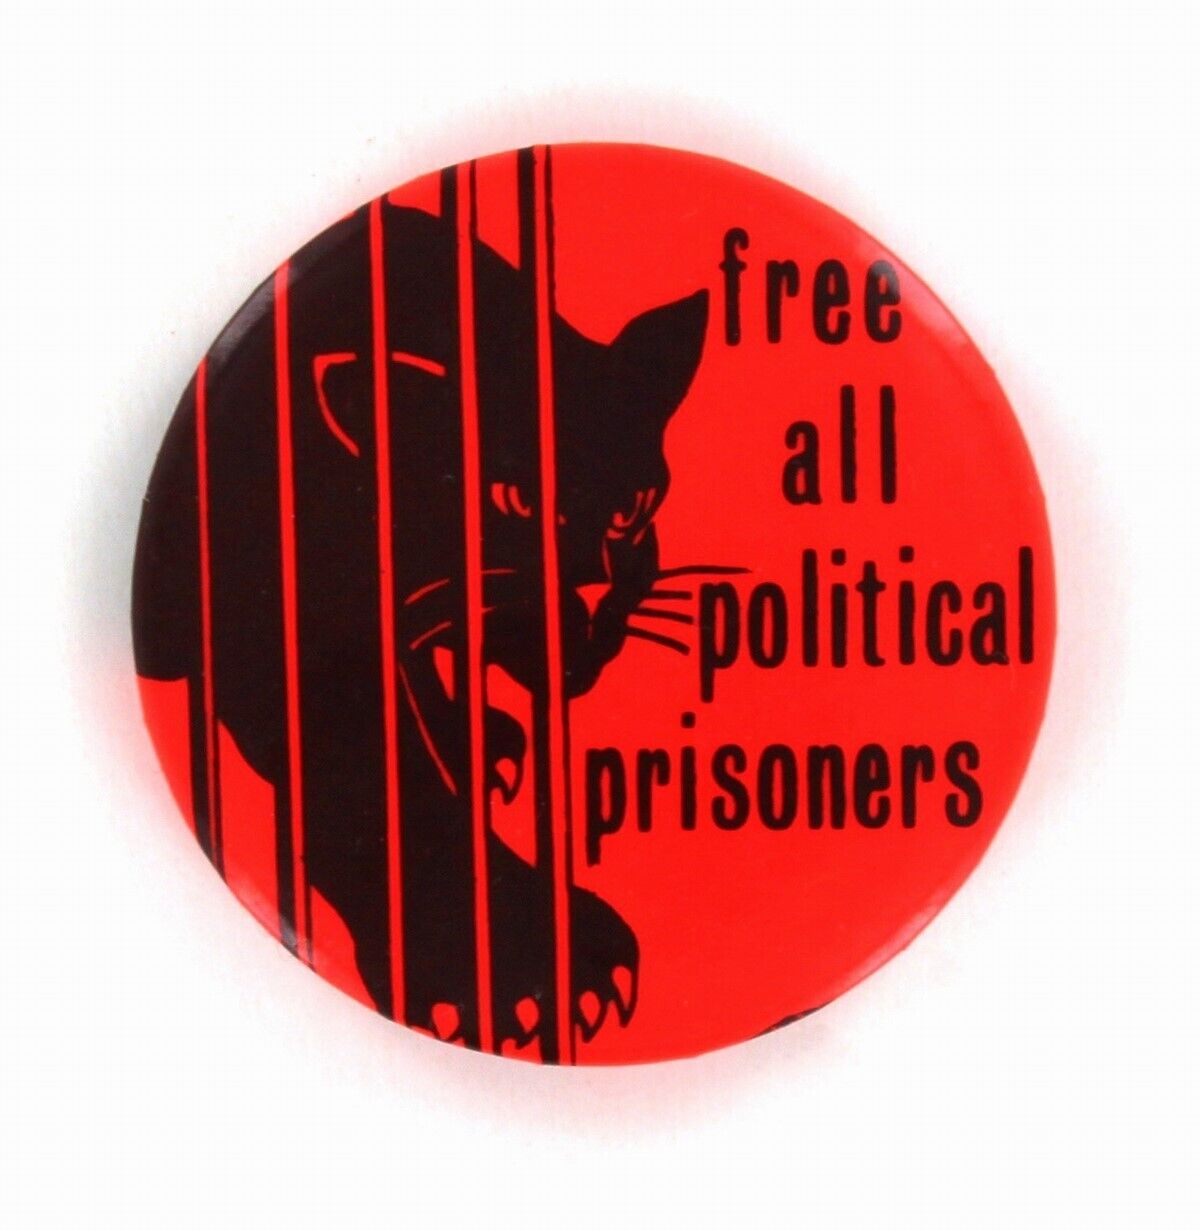 Blank Panther Party 1969 Huey Newton Button Free All Political Prisoners P1728